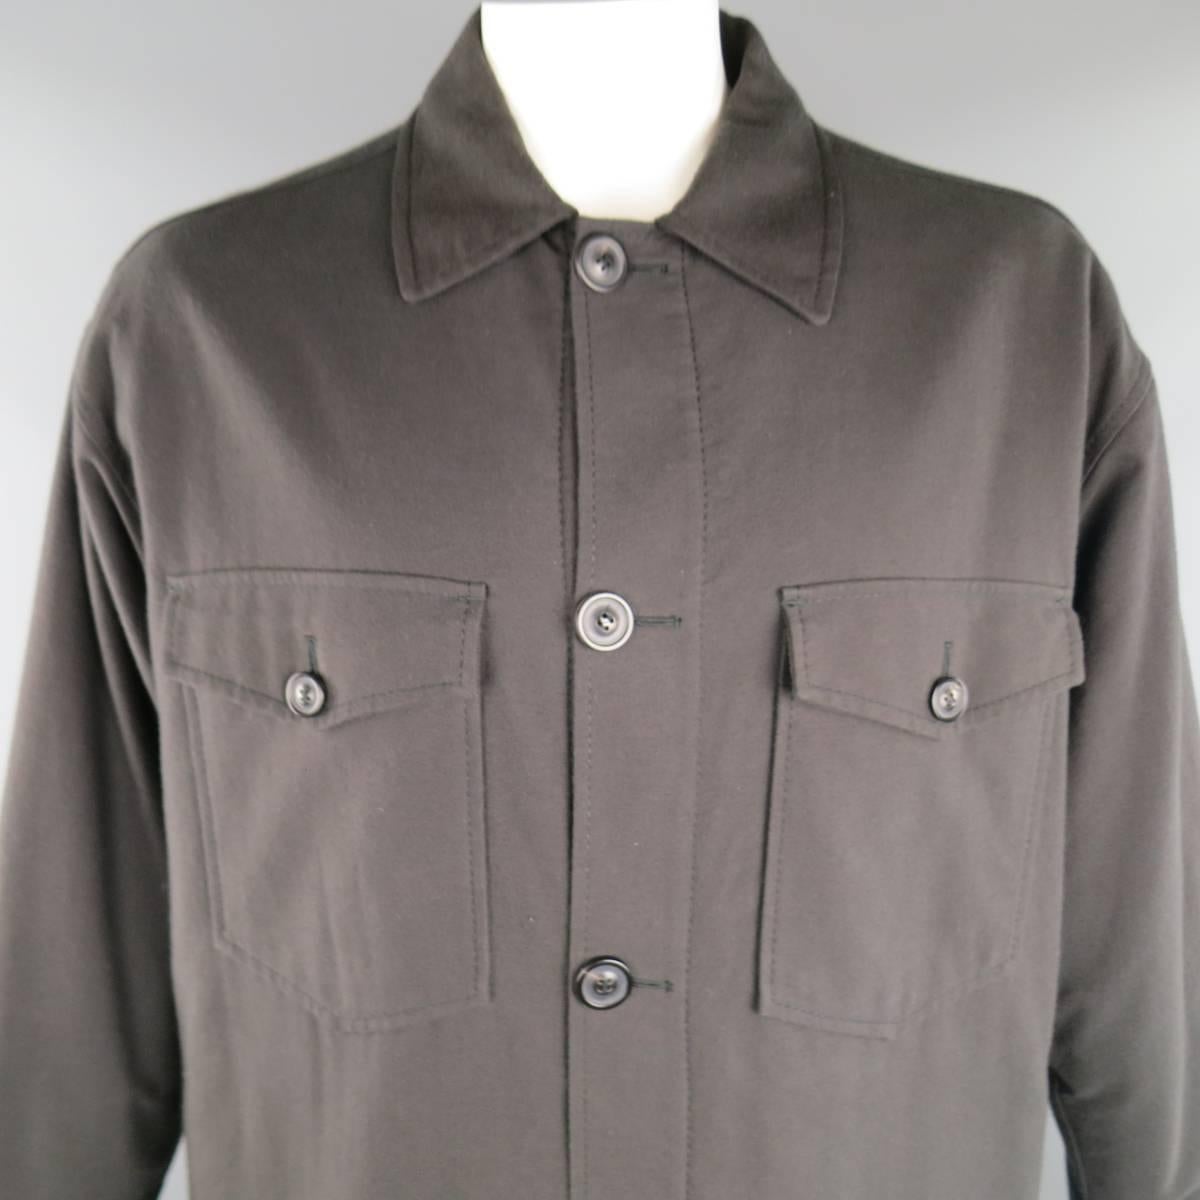 MAISON MARTIN MARGIELA oversized shirt jacket comes in a cotton wool blend flannel twill and features a classic pointed collar, patch flap pockets, sit hem, and button up front. Made in Italy.
 
Excellent Pre-Owned Condition. Retails at